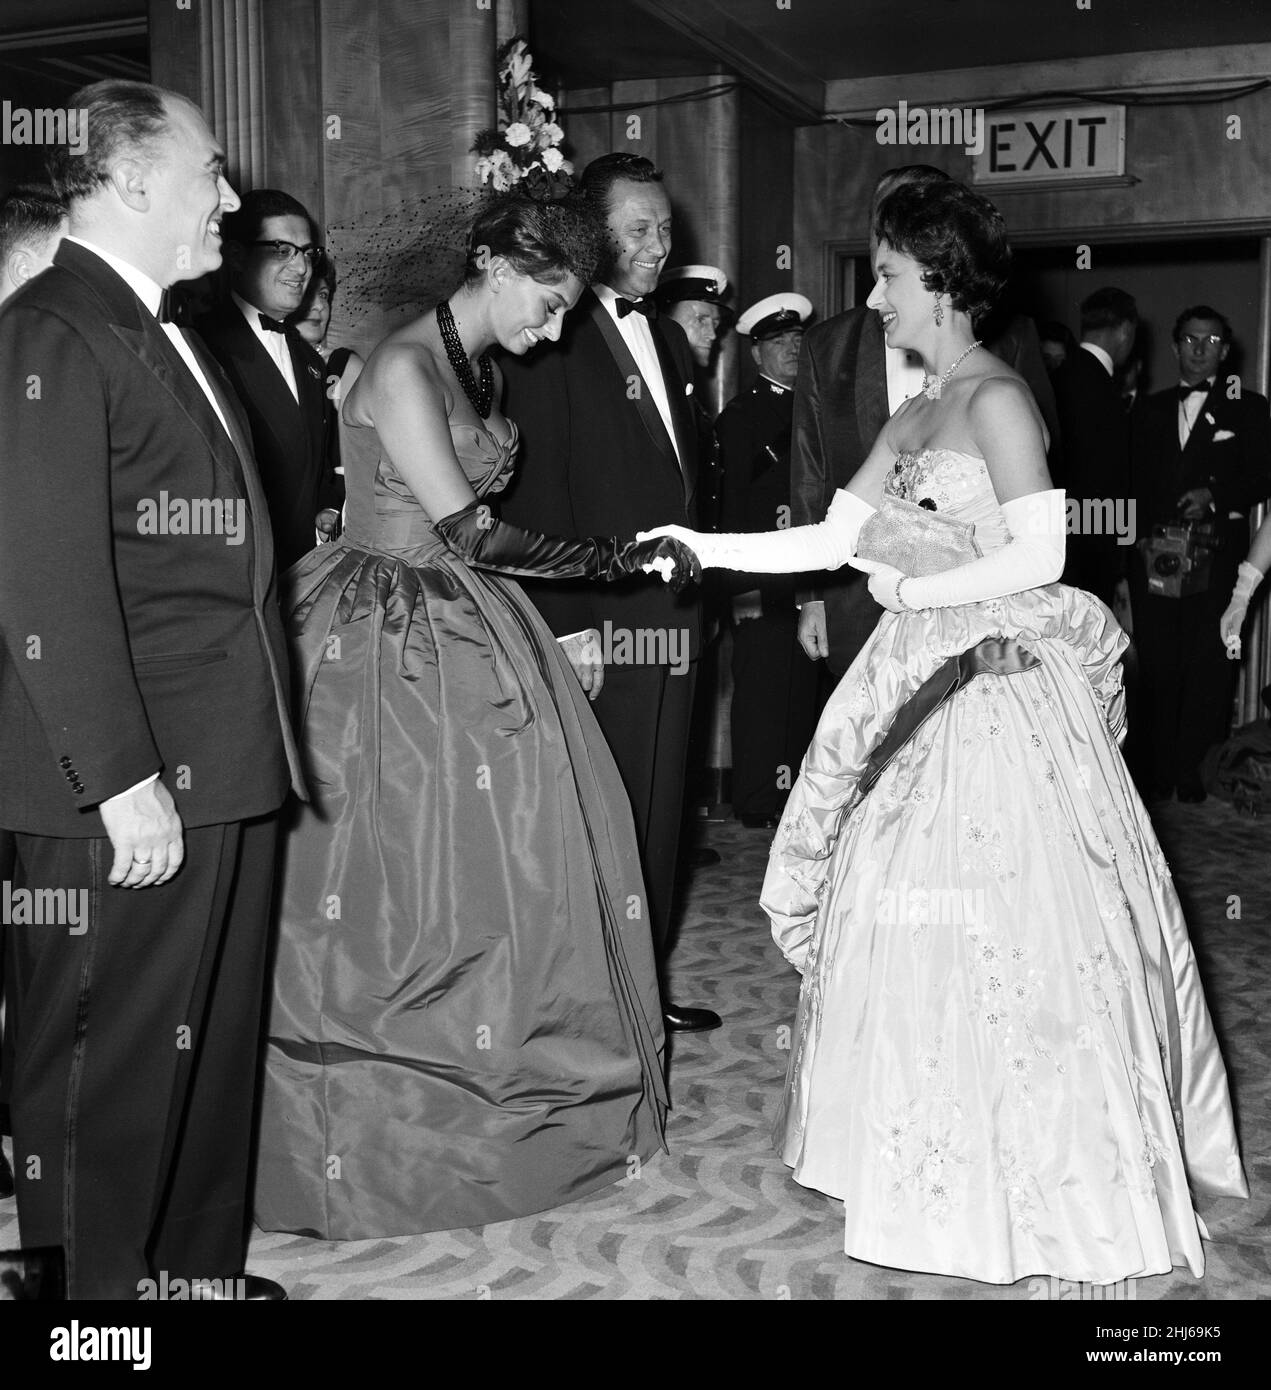 Variety Club charity premier of 'The Key', Odeon Leicester Square, London. Sophia Loren being presented to Princess Margaret, on Sophia's left is William Holden. 29th May 1958. Stock Photo